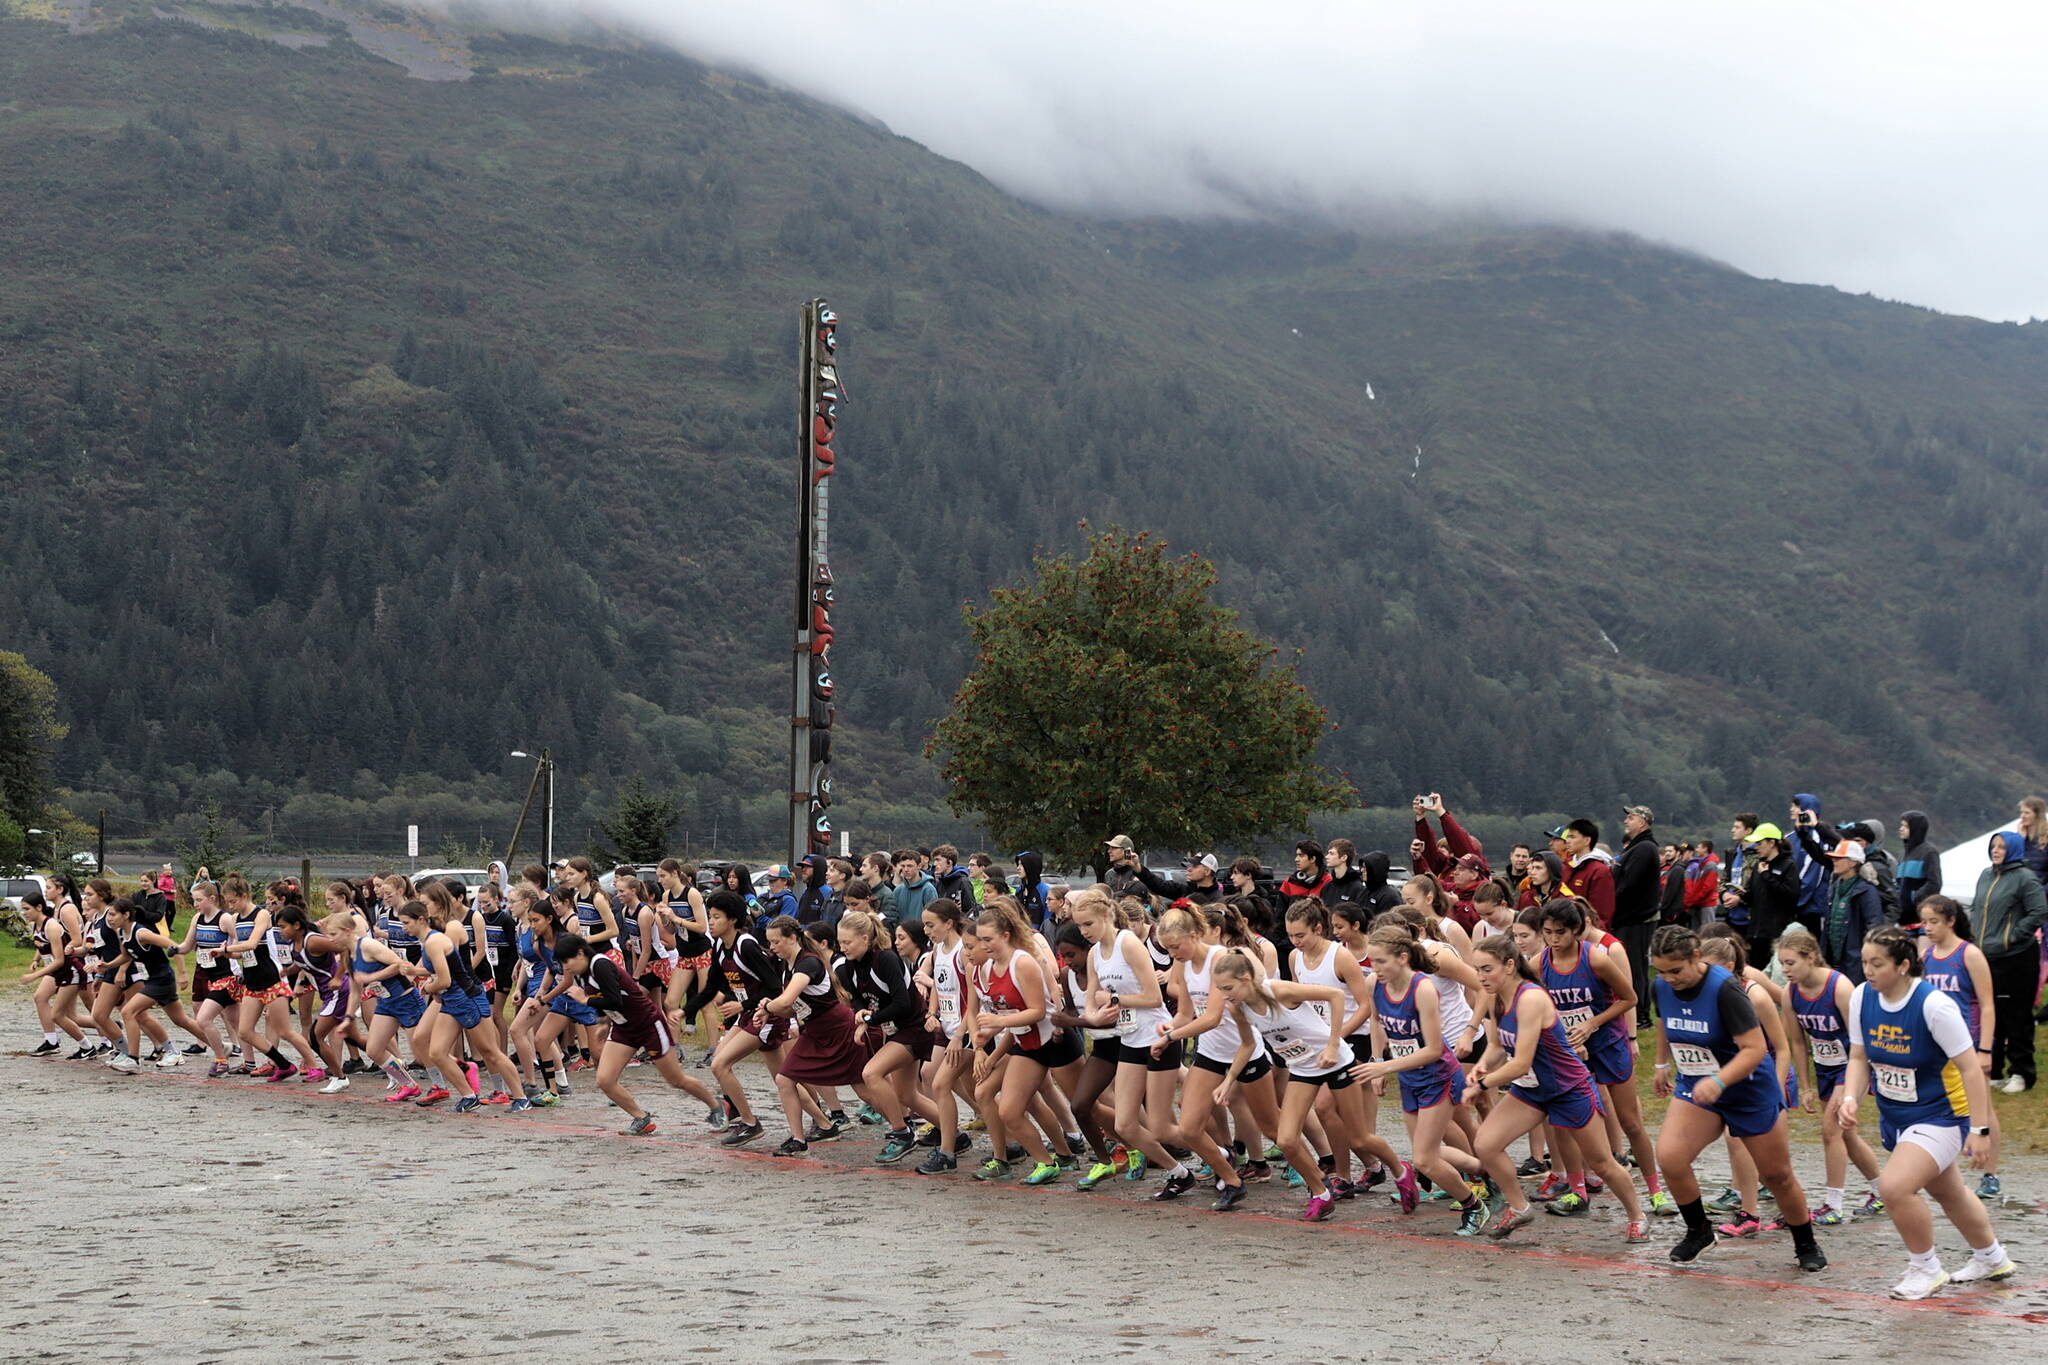 Eighty-four girls from Southeast Alaska high schools set out from the starting line of the Capital City Invite’s 5K race on Saturday. All but three of the runners completed the muddy course. (Mark Sabbatini / Juneau Empire)